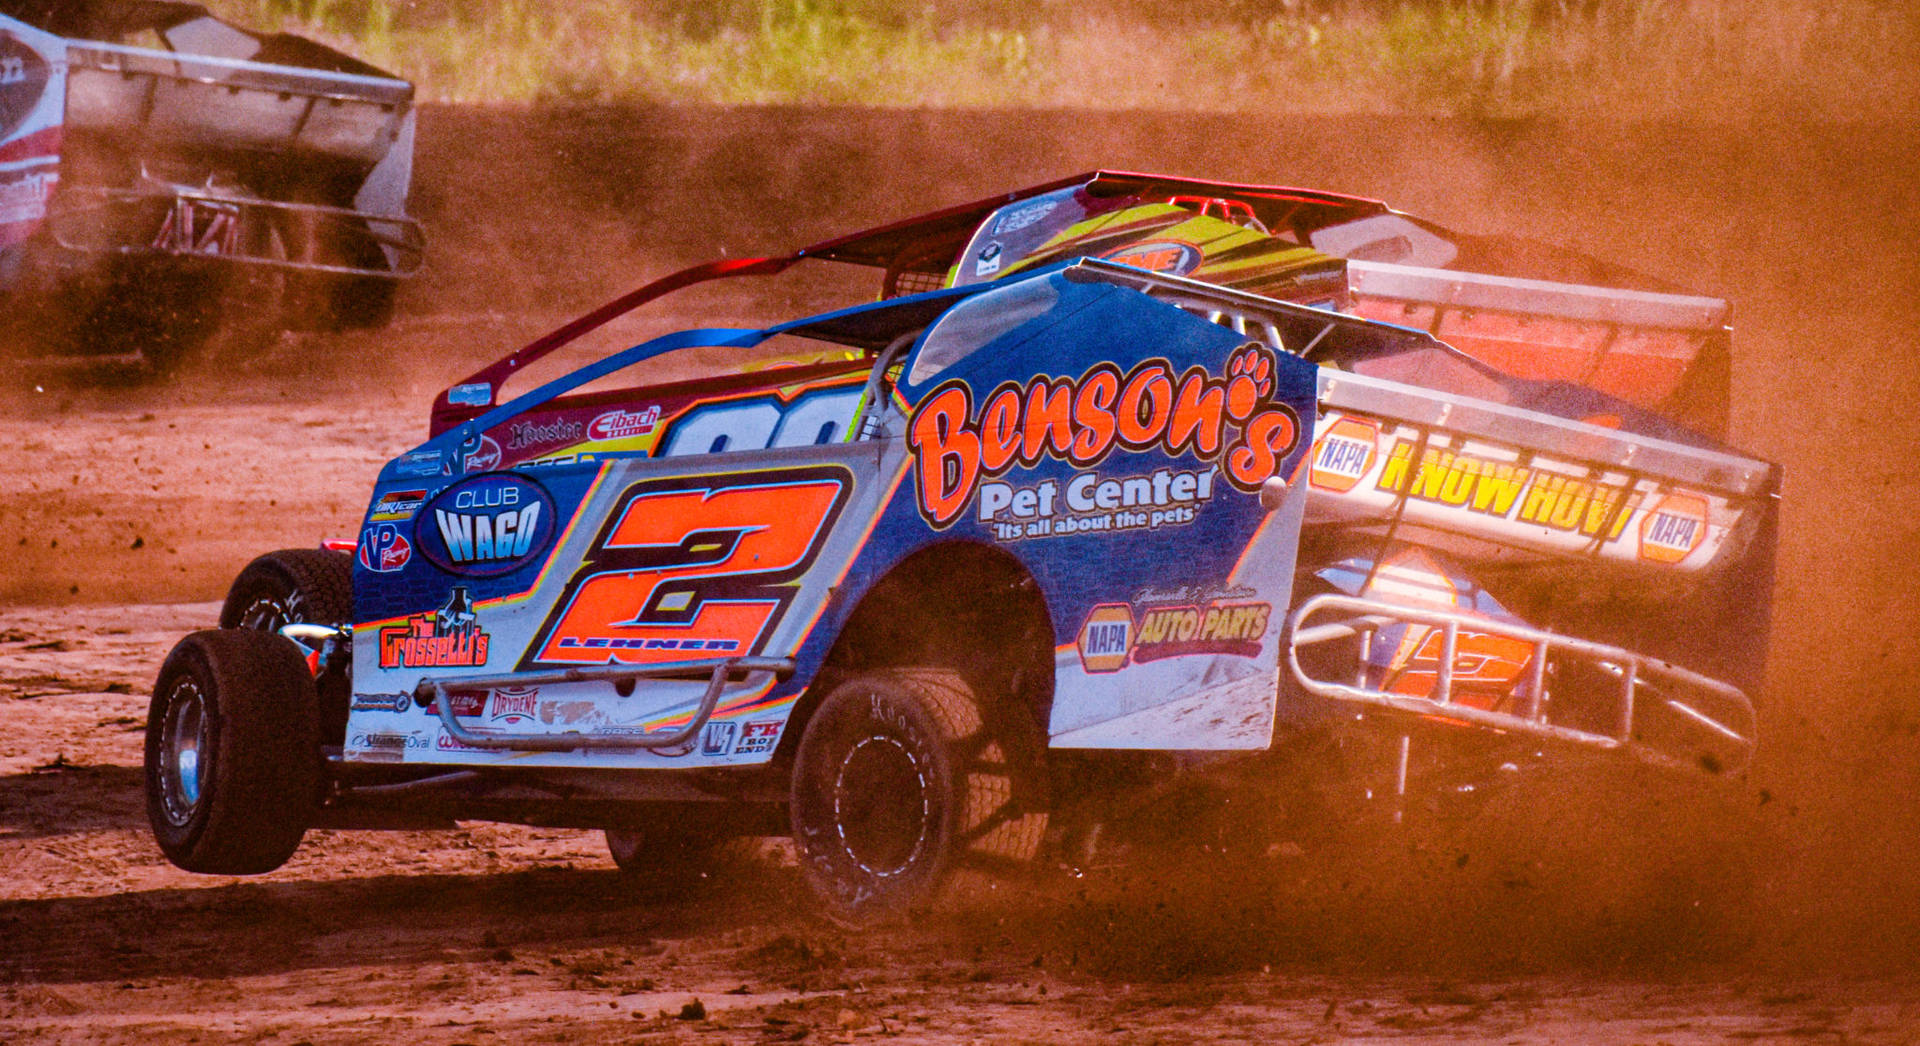 Speed and thrills await on the dirt track Wallpaper